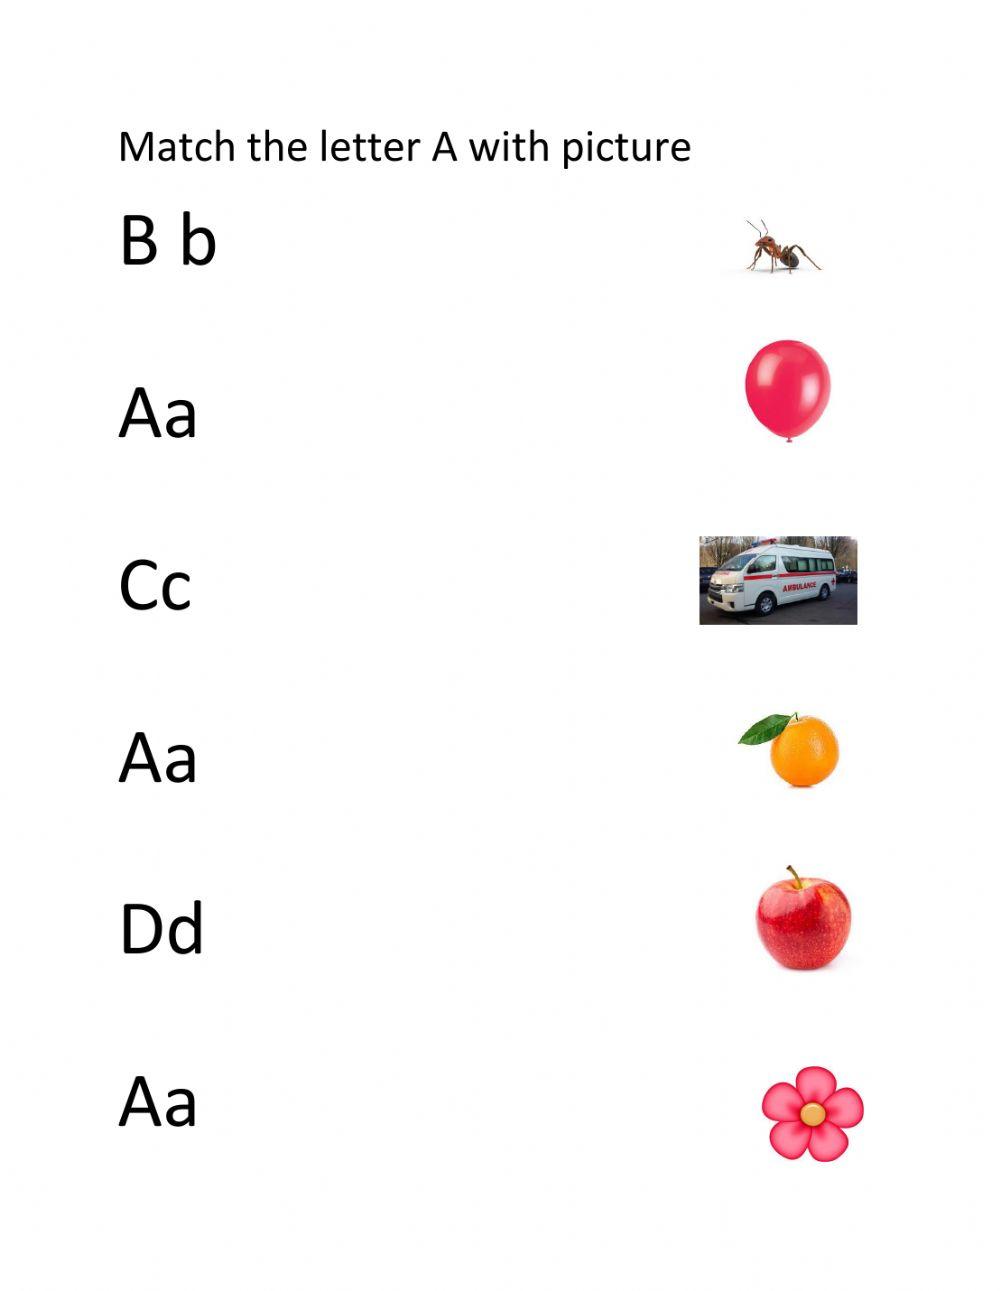 Match the letter Aa with picture